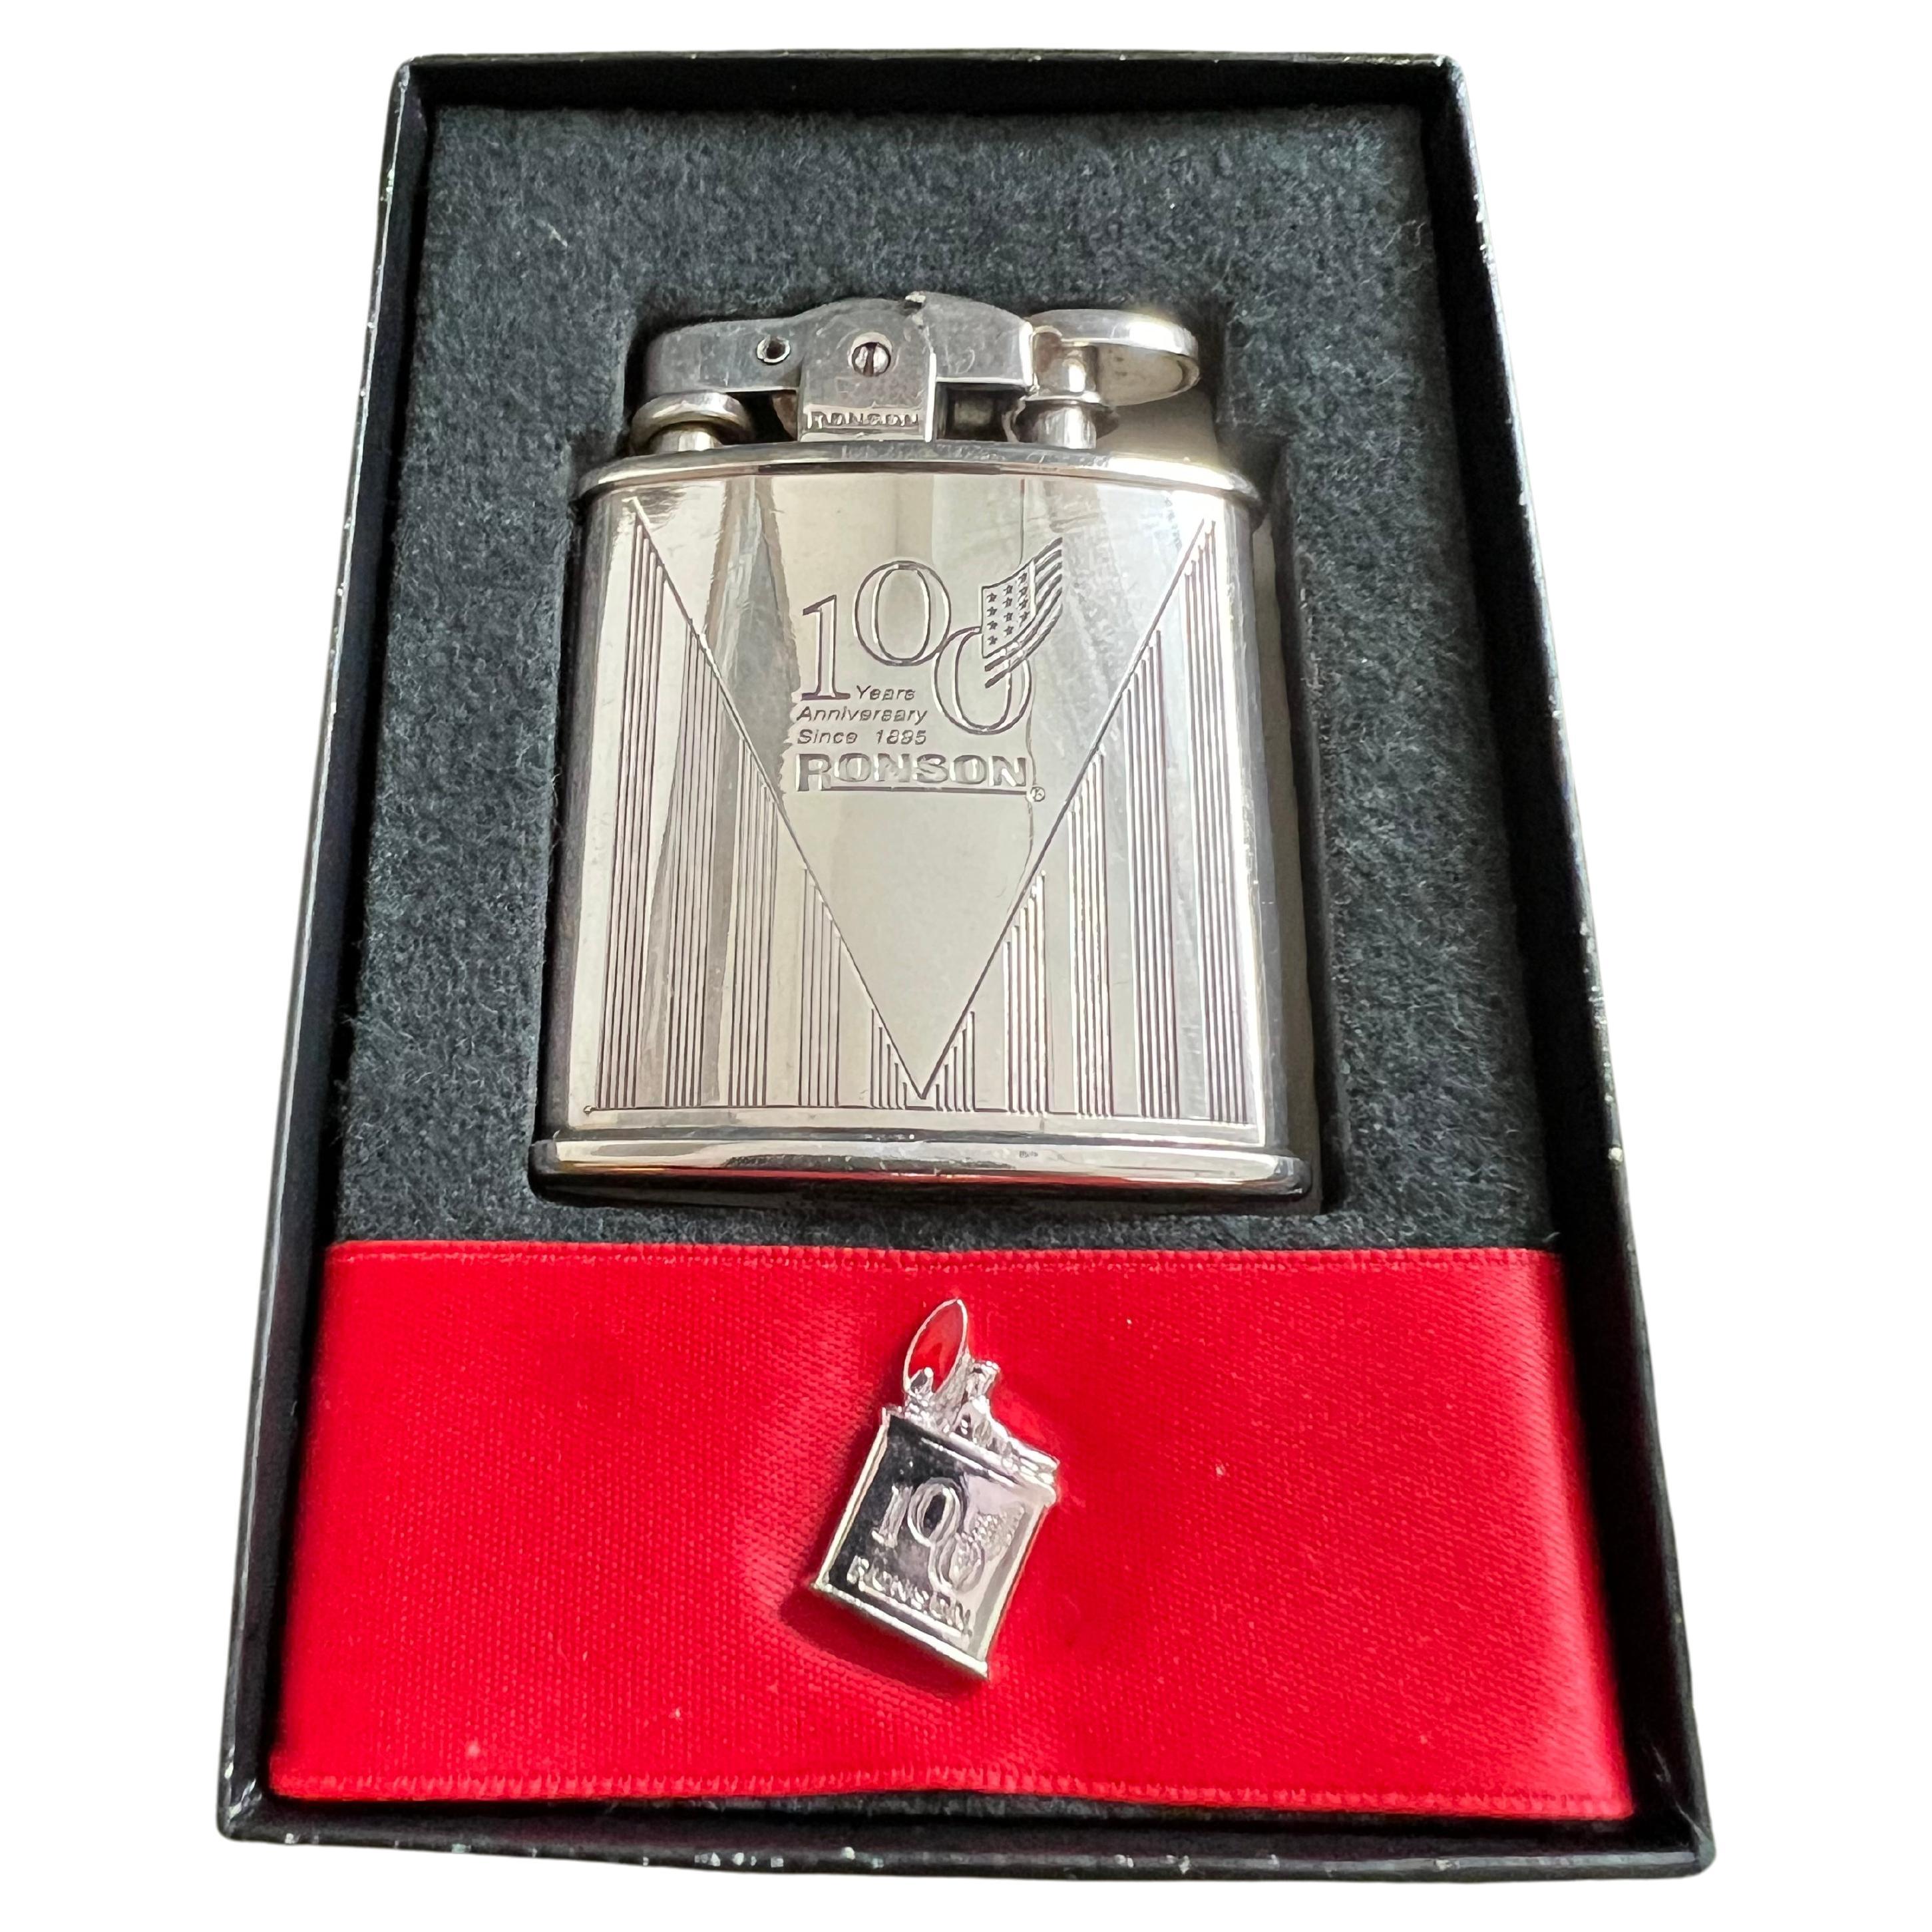 Ronson “1943” Limited Edition 100 Year Anniversary Silver Plated Vintage Lighter 
“1943” Limited Edition 100 Year Anniversary Silver Plated Ronson 
Comes in its original special 100 year box 
With logo on
This is a very limited edition in mint